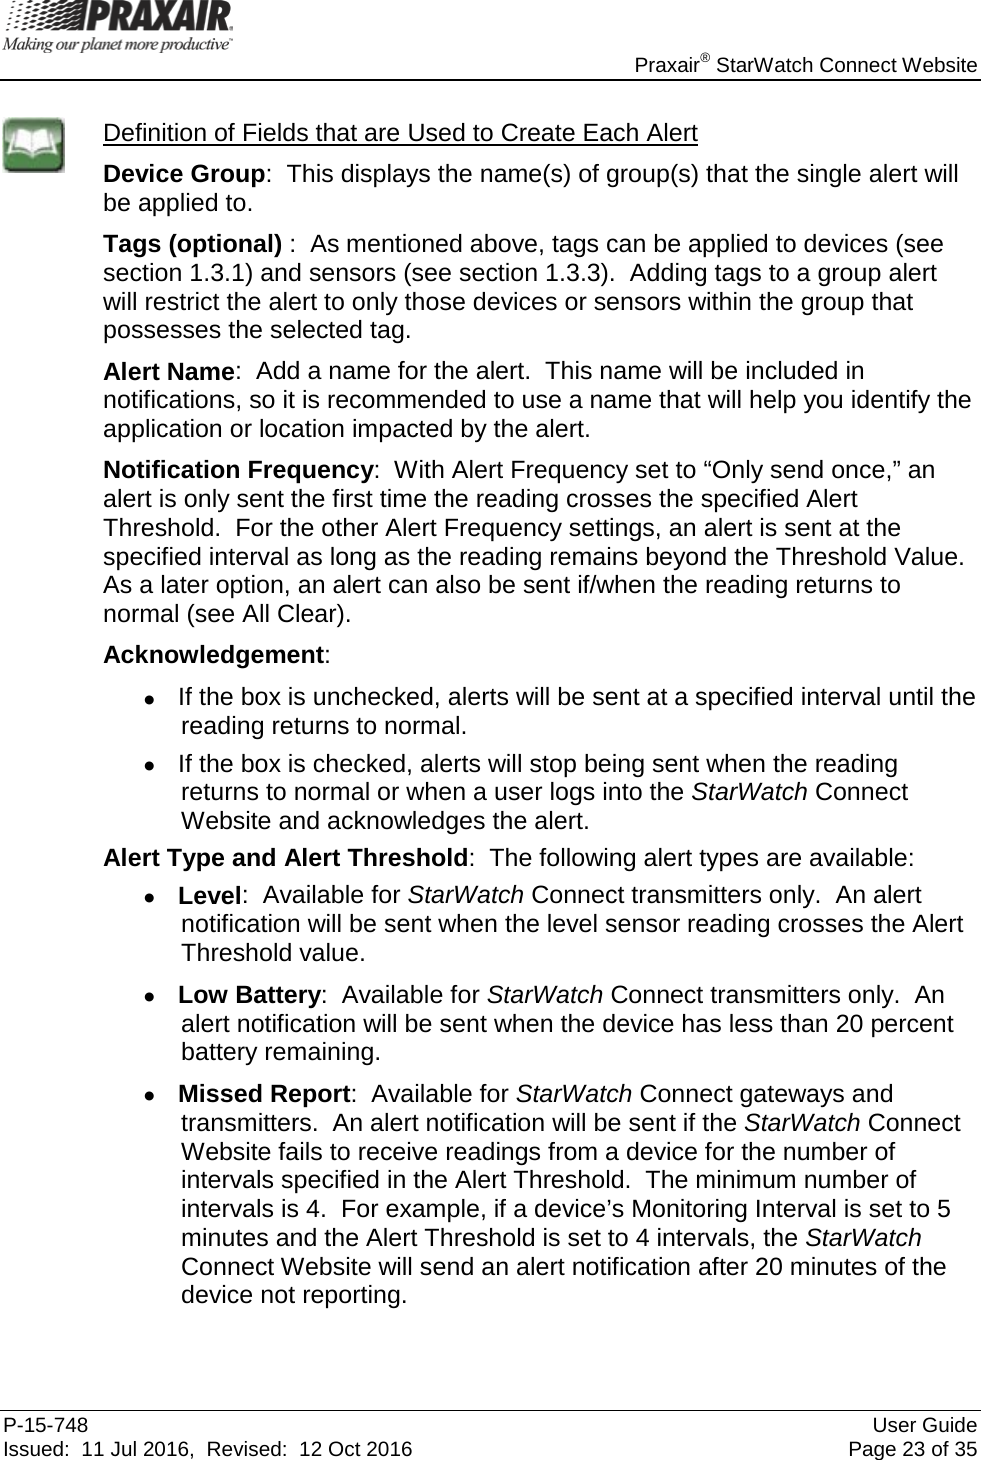    Praxair® StarWatch Connect Website P-15-748 User Guide Issued:  11 Jul 2016,  Revised:  12 Oct 2016 Page 23 of 35  Definition of Fields that are Used to Create Each Alert Device Group:  This displays the name(s) of group(s) that the single alert will be applied to.   Tags (optional) :  As mentioned above, tags can be applied to devices (see section 1.3.1) and sensors (see section 1.3.3).  Adding tags to a group alert will restrict the alert to only those devices or sensors within the group that possesses the selected tag.  Alert Name:  Add a name for the alert.  This name will be included in notifications, so it is recommended to use a name that will help you identify the application or location impacted by the alert. Notification Frequency:  With Alert Frequency set to “Only send once,” an alert is only sent the first time the reading crosses the specified Alert Threshold.  For the other Alert Frequency settings, an alert is sent at the specified interval as long as the reading remains beyond the Threshold Value.  As a later option, an alert can also be sent if/when the reading returns to normal (see All Clear).  Acknowledgement:   • If the box is unchecked, alerts will be sent at a specified interval until the reading returns to normal.   • If the box is checked, alerts will stop being sent when the reading returns to normal or when a user logs into the StarWatch Connect Website and acknowledges the alert. Alert Type and Alert Threshold:  The following alert types are available: • Level:  Available for StarWatch Connect transmitters only.  An alert notification will be sent when the level sensor reading crosses the Alert Threshold value. • Low Battery:  Available for StarWatch Connect transmitters only.  An alert notification will be sent when the device has less than 20 percent battery remaining. • Missed Report:  Available for StarWatch Connect gateways and transmitters.  An alert notification will be sent if the StarWatch Connect Website fails to receive readings from a device for the number of intervals specified in the Alert Threshold.  The minimum number of intervals is 4.  For example, if a device’s Monitoring Interval is set to 5 minutes and the Alert Threshold is set to 4 intervals, the StarWatch Connect Website will send an alert notification after 20 minutes of the device not reporting.  